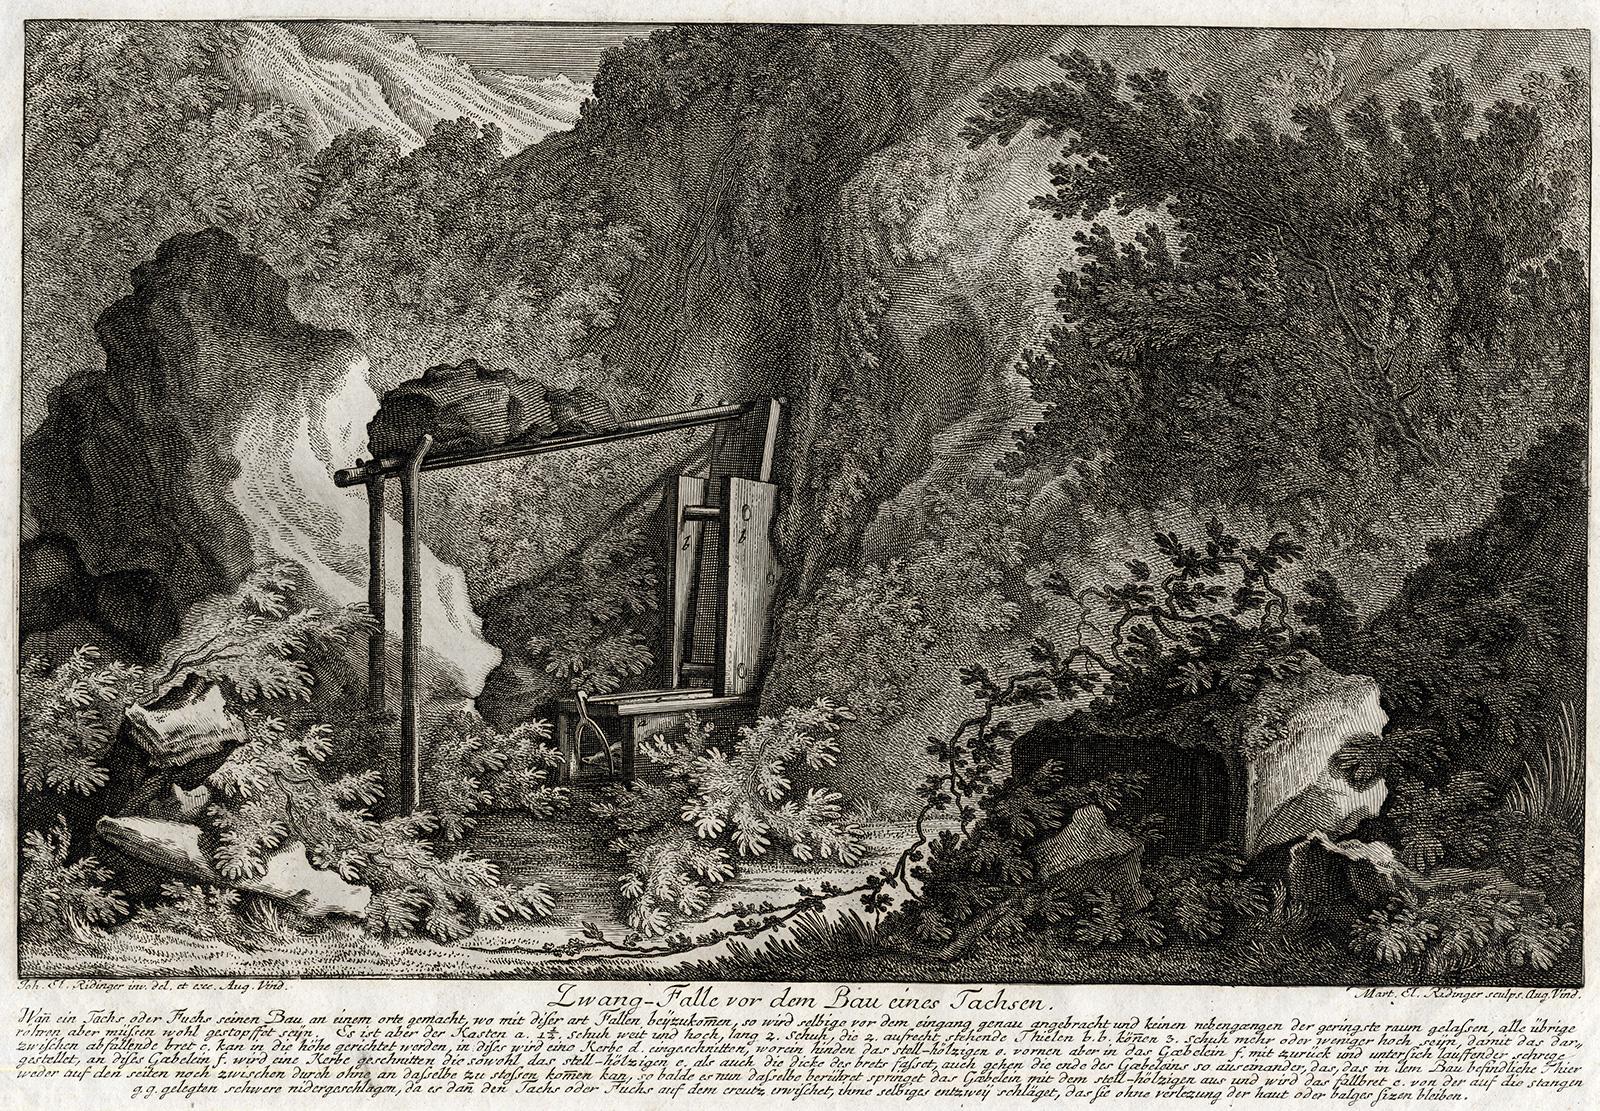 Martin Elias Ridinger Landscape Print - Hunting scene catching a badger in a trap by Ridinger - Engraving - 18th century